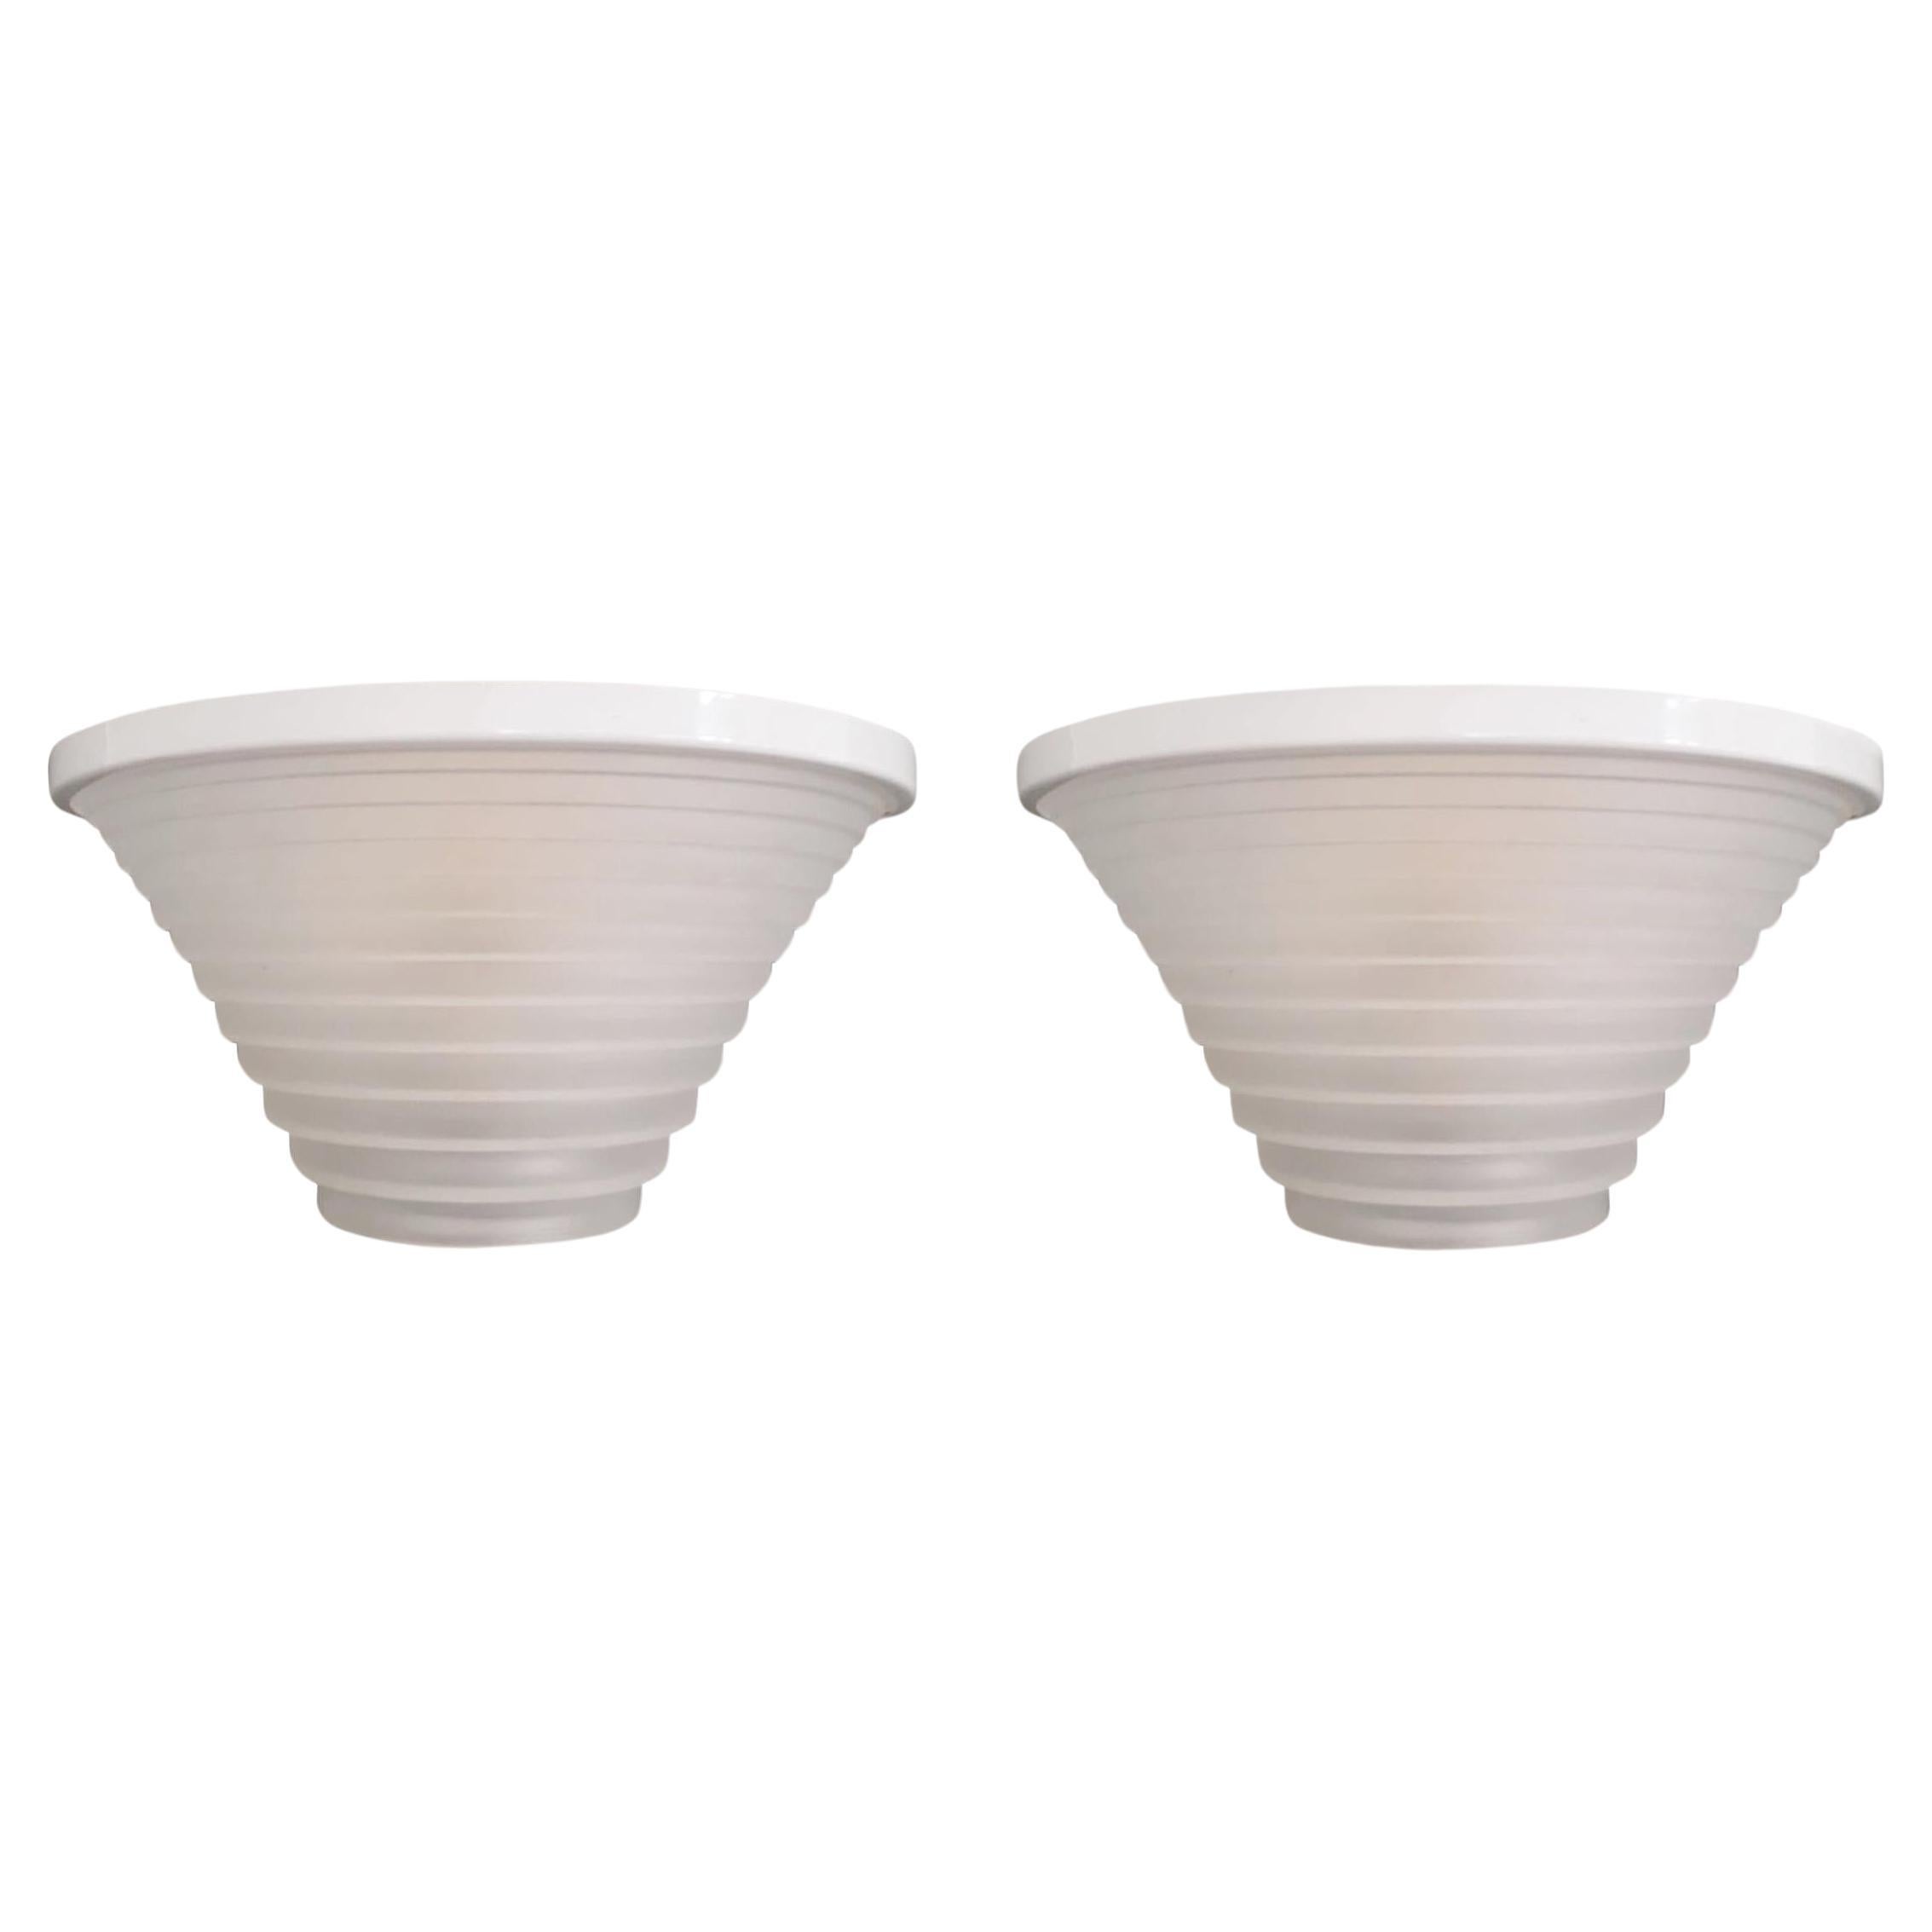 Pair of Egisto 28 Sconces by Artemide - 5 Pairs Available For Sale